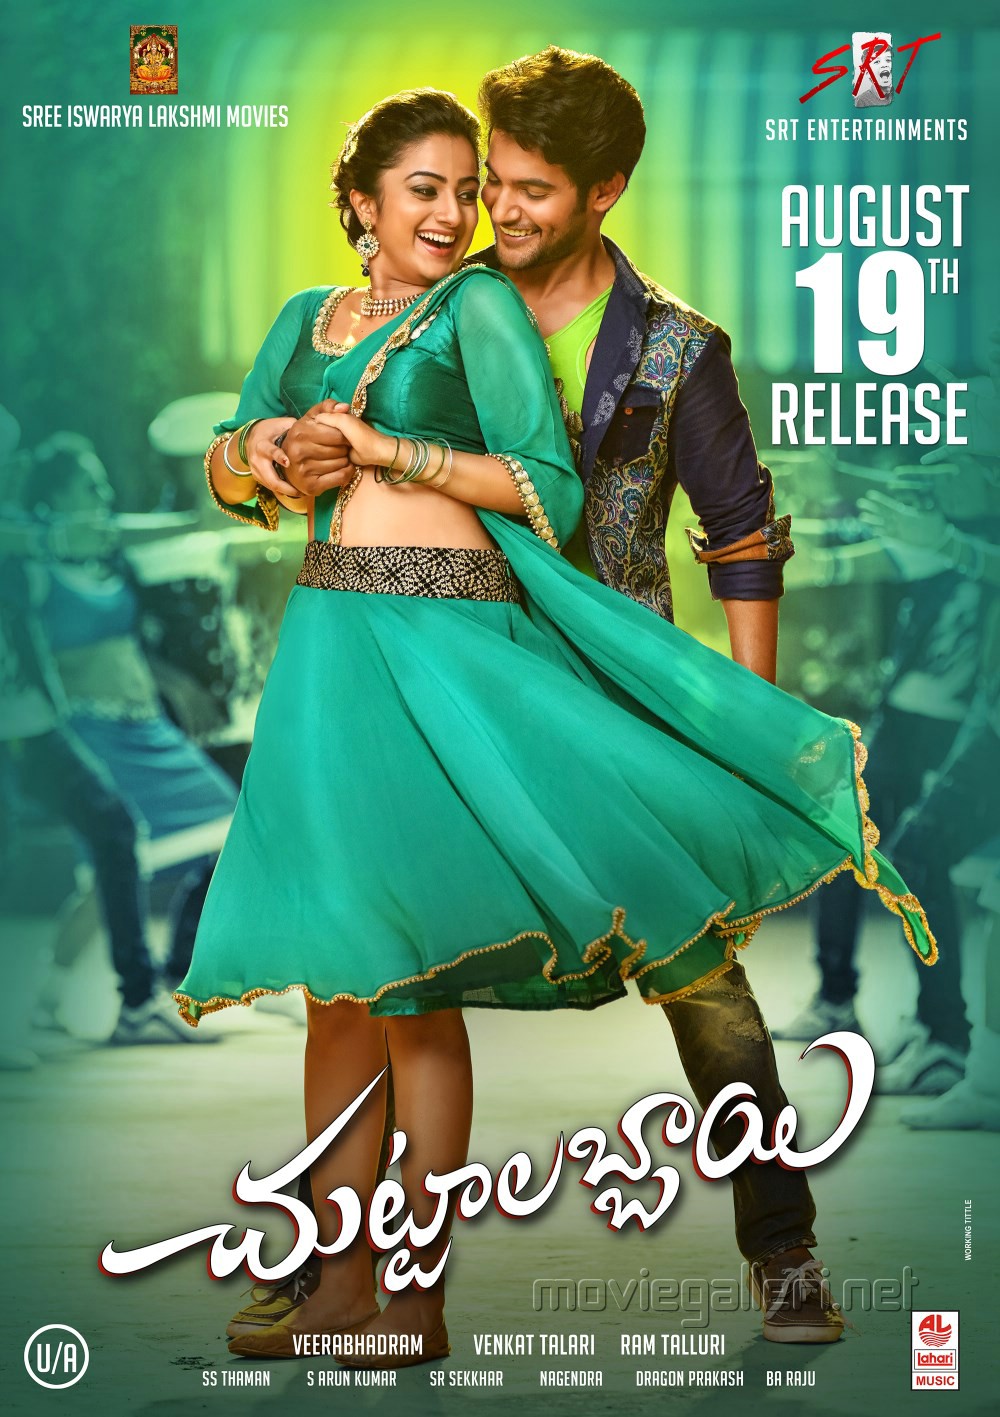 chuttalabbayi movie release august 19th posters 28e5925